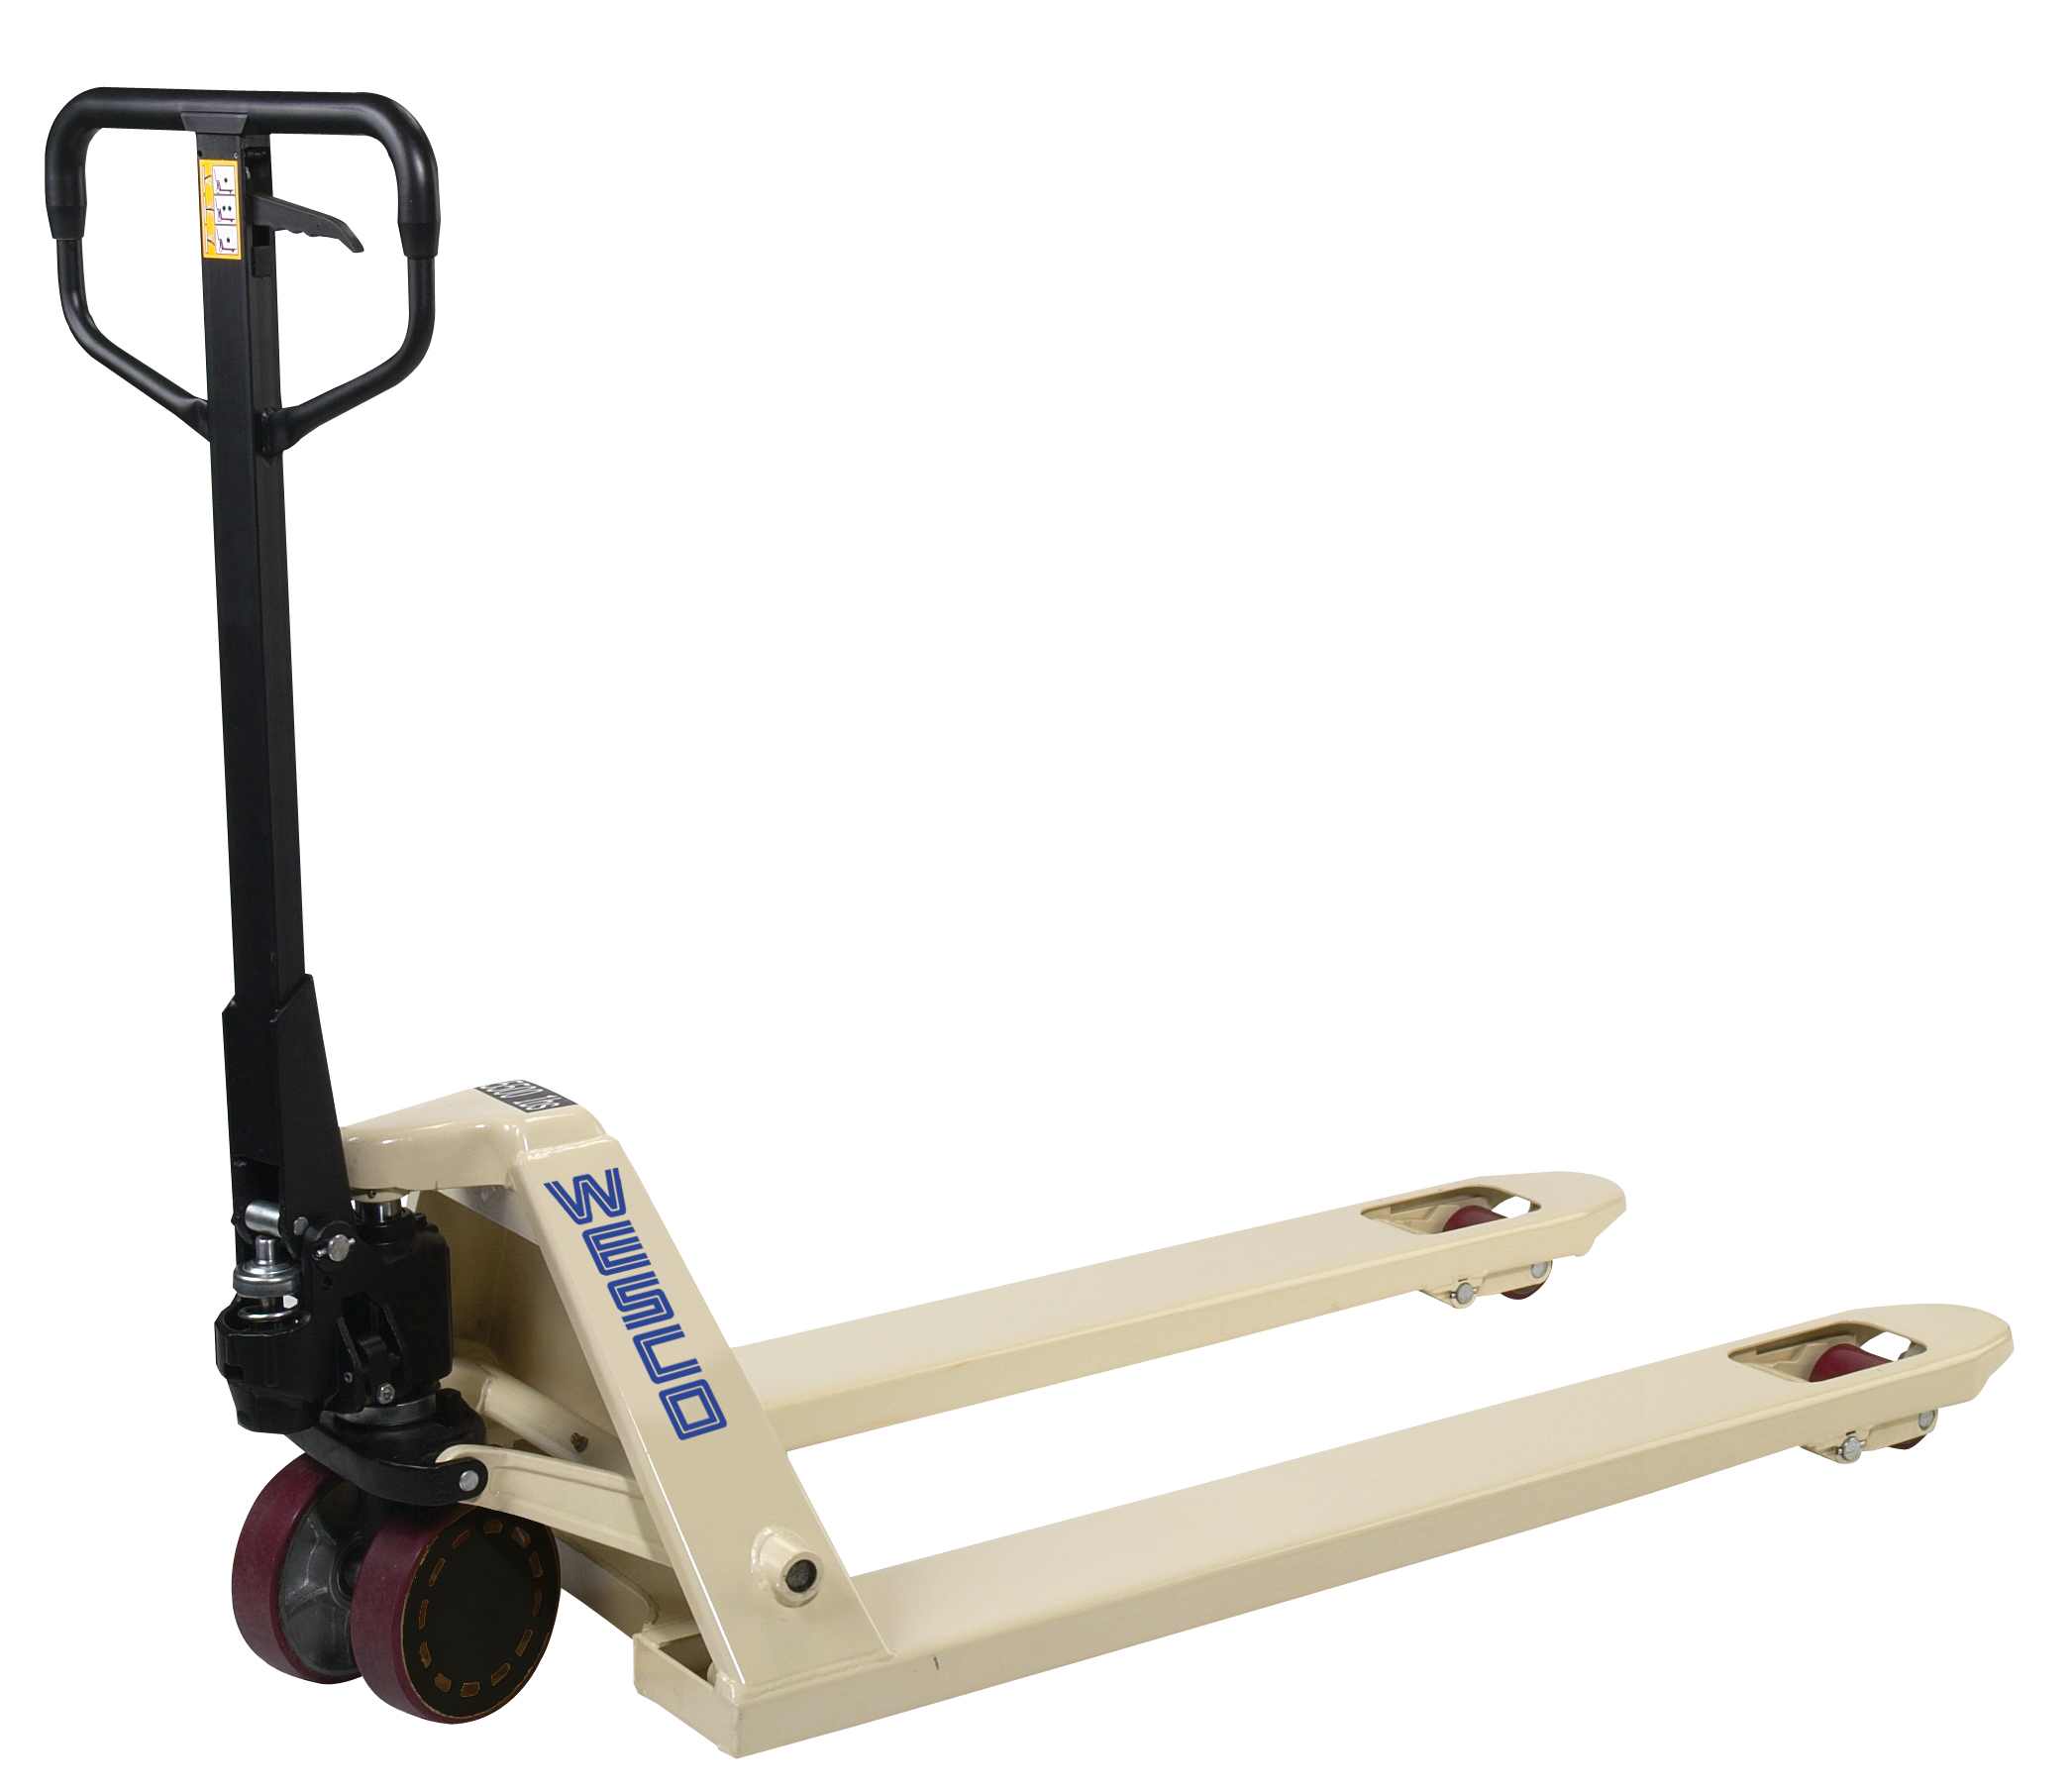 Narrow Aisle Pallet Truck, 5500 Lbs Capacity, 18 Inch x 48 Inch Fork Size